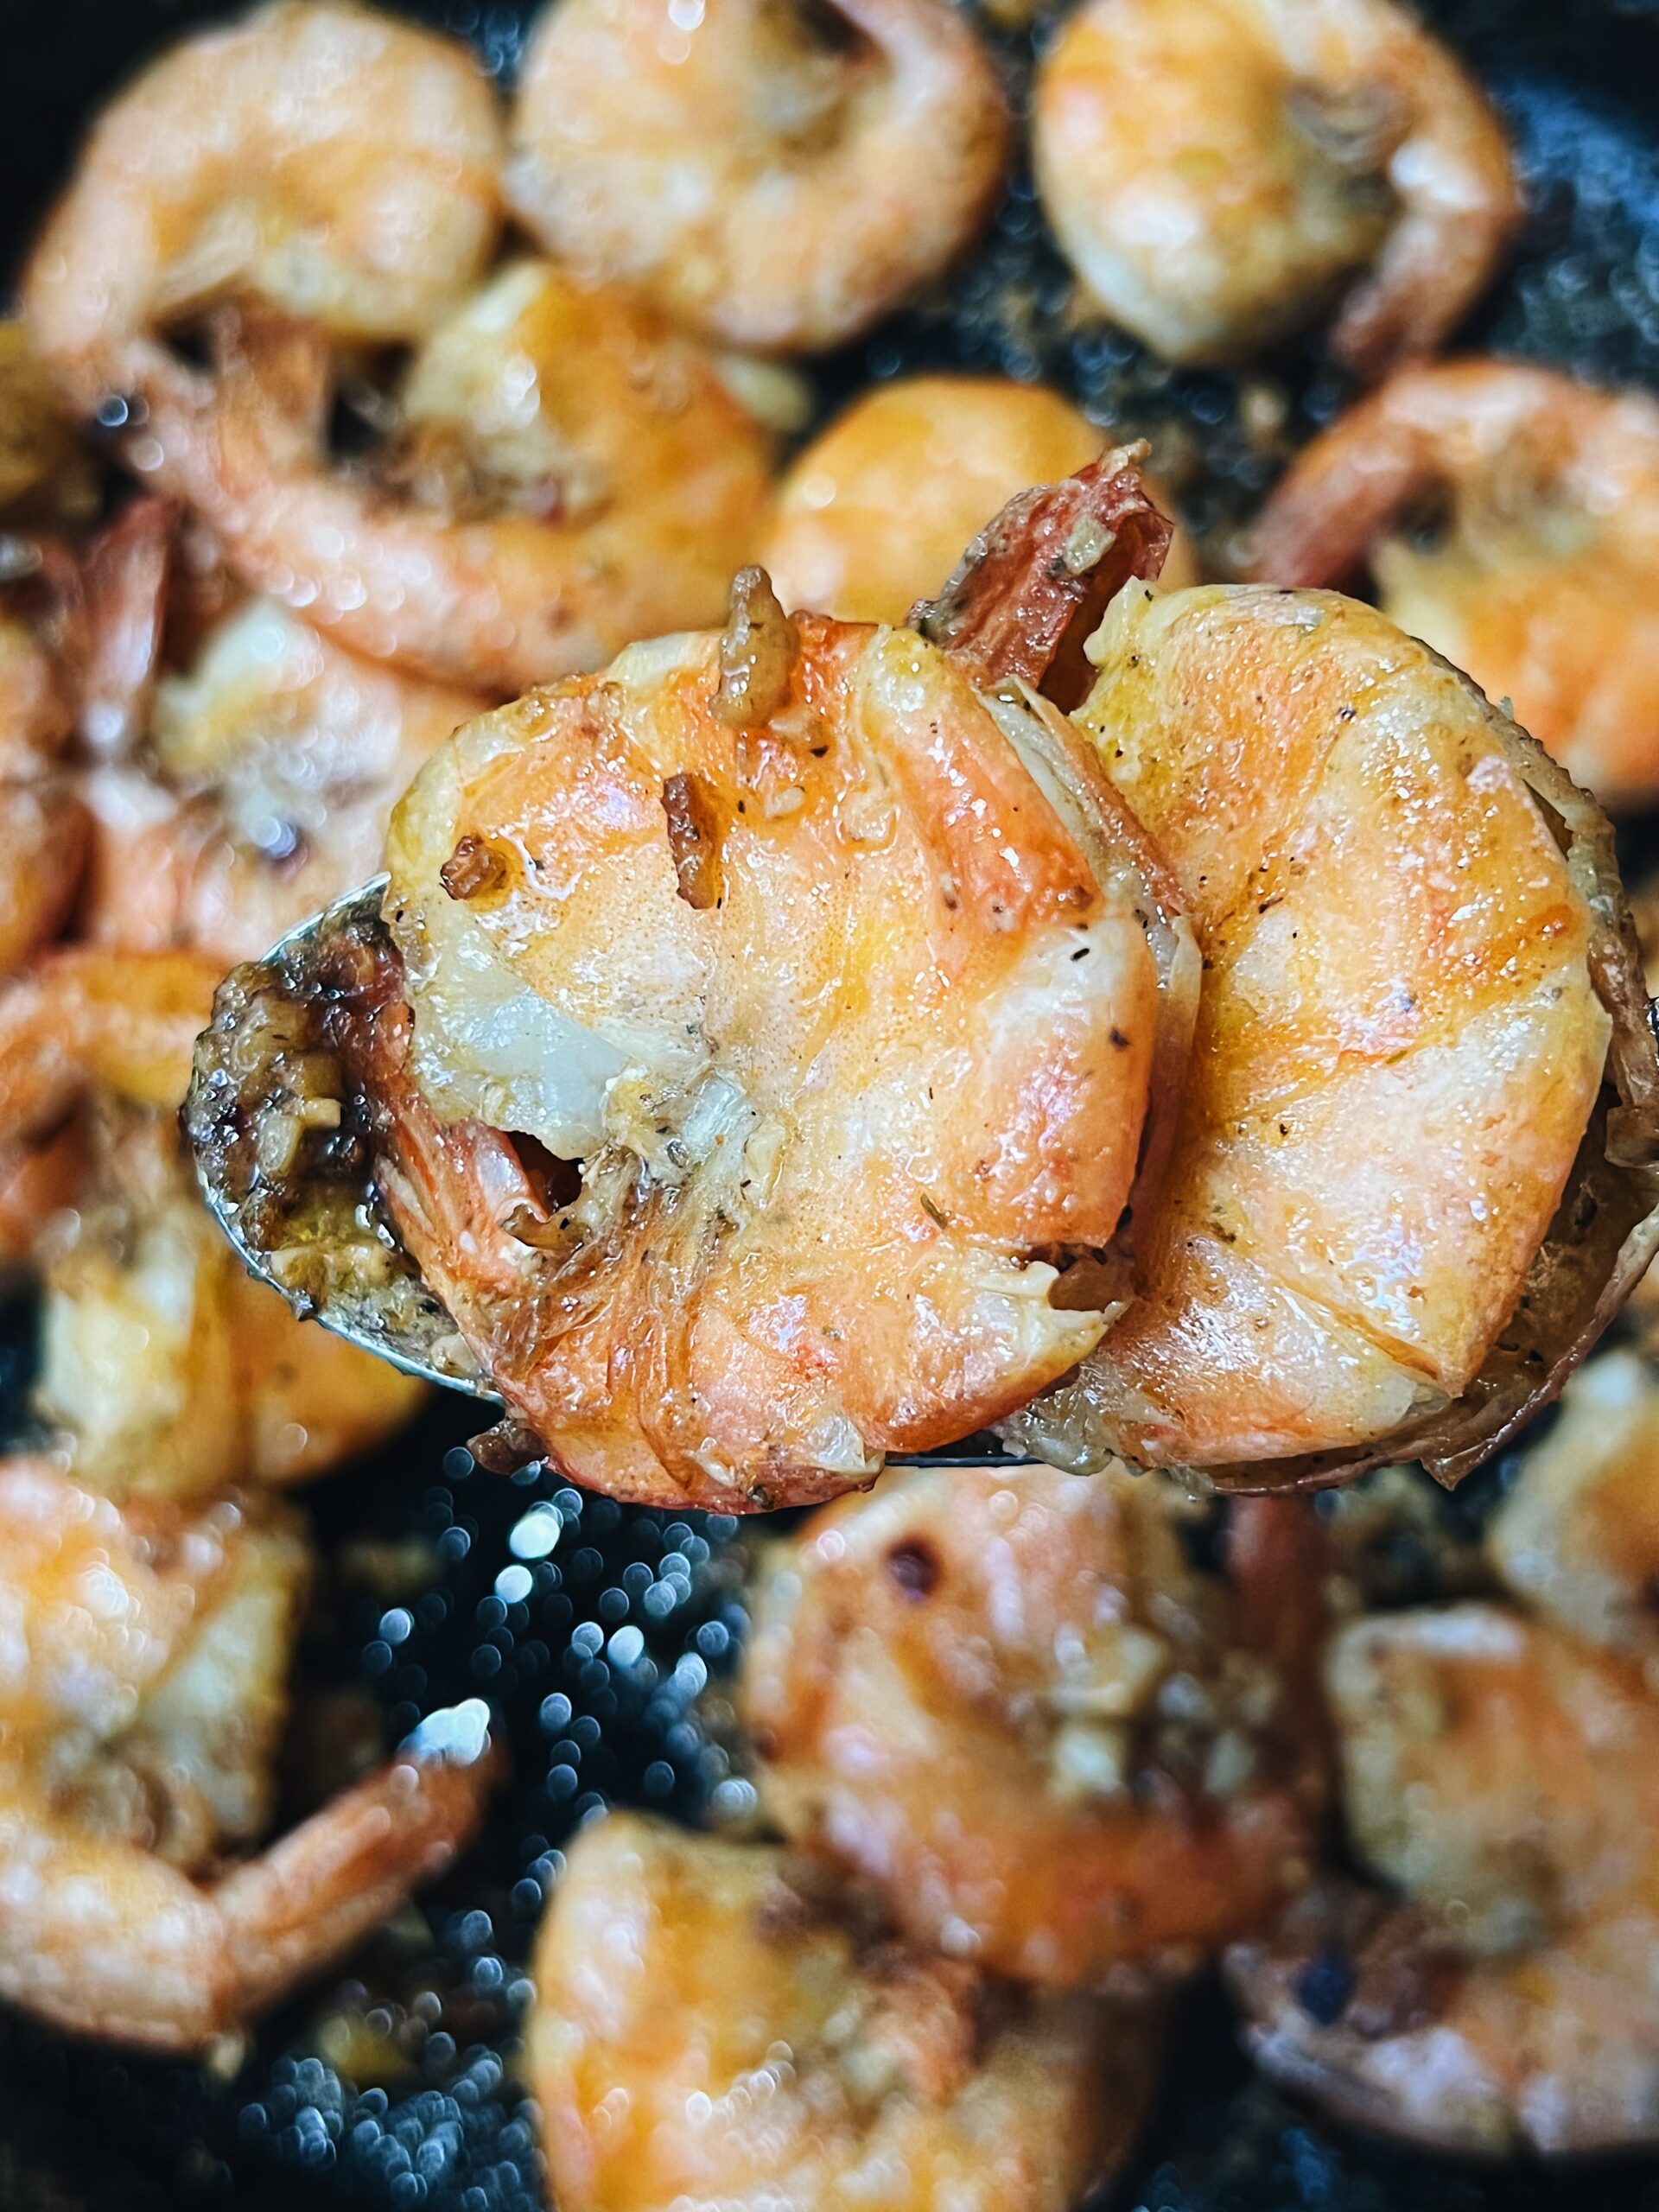 2 garlic shrimp cooked with shell on in a spoon being held up to the camera. garlic shrimp in a pan in the background.